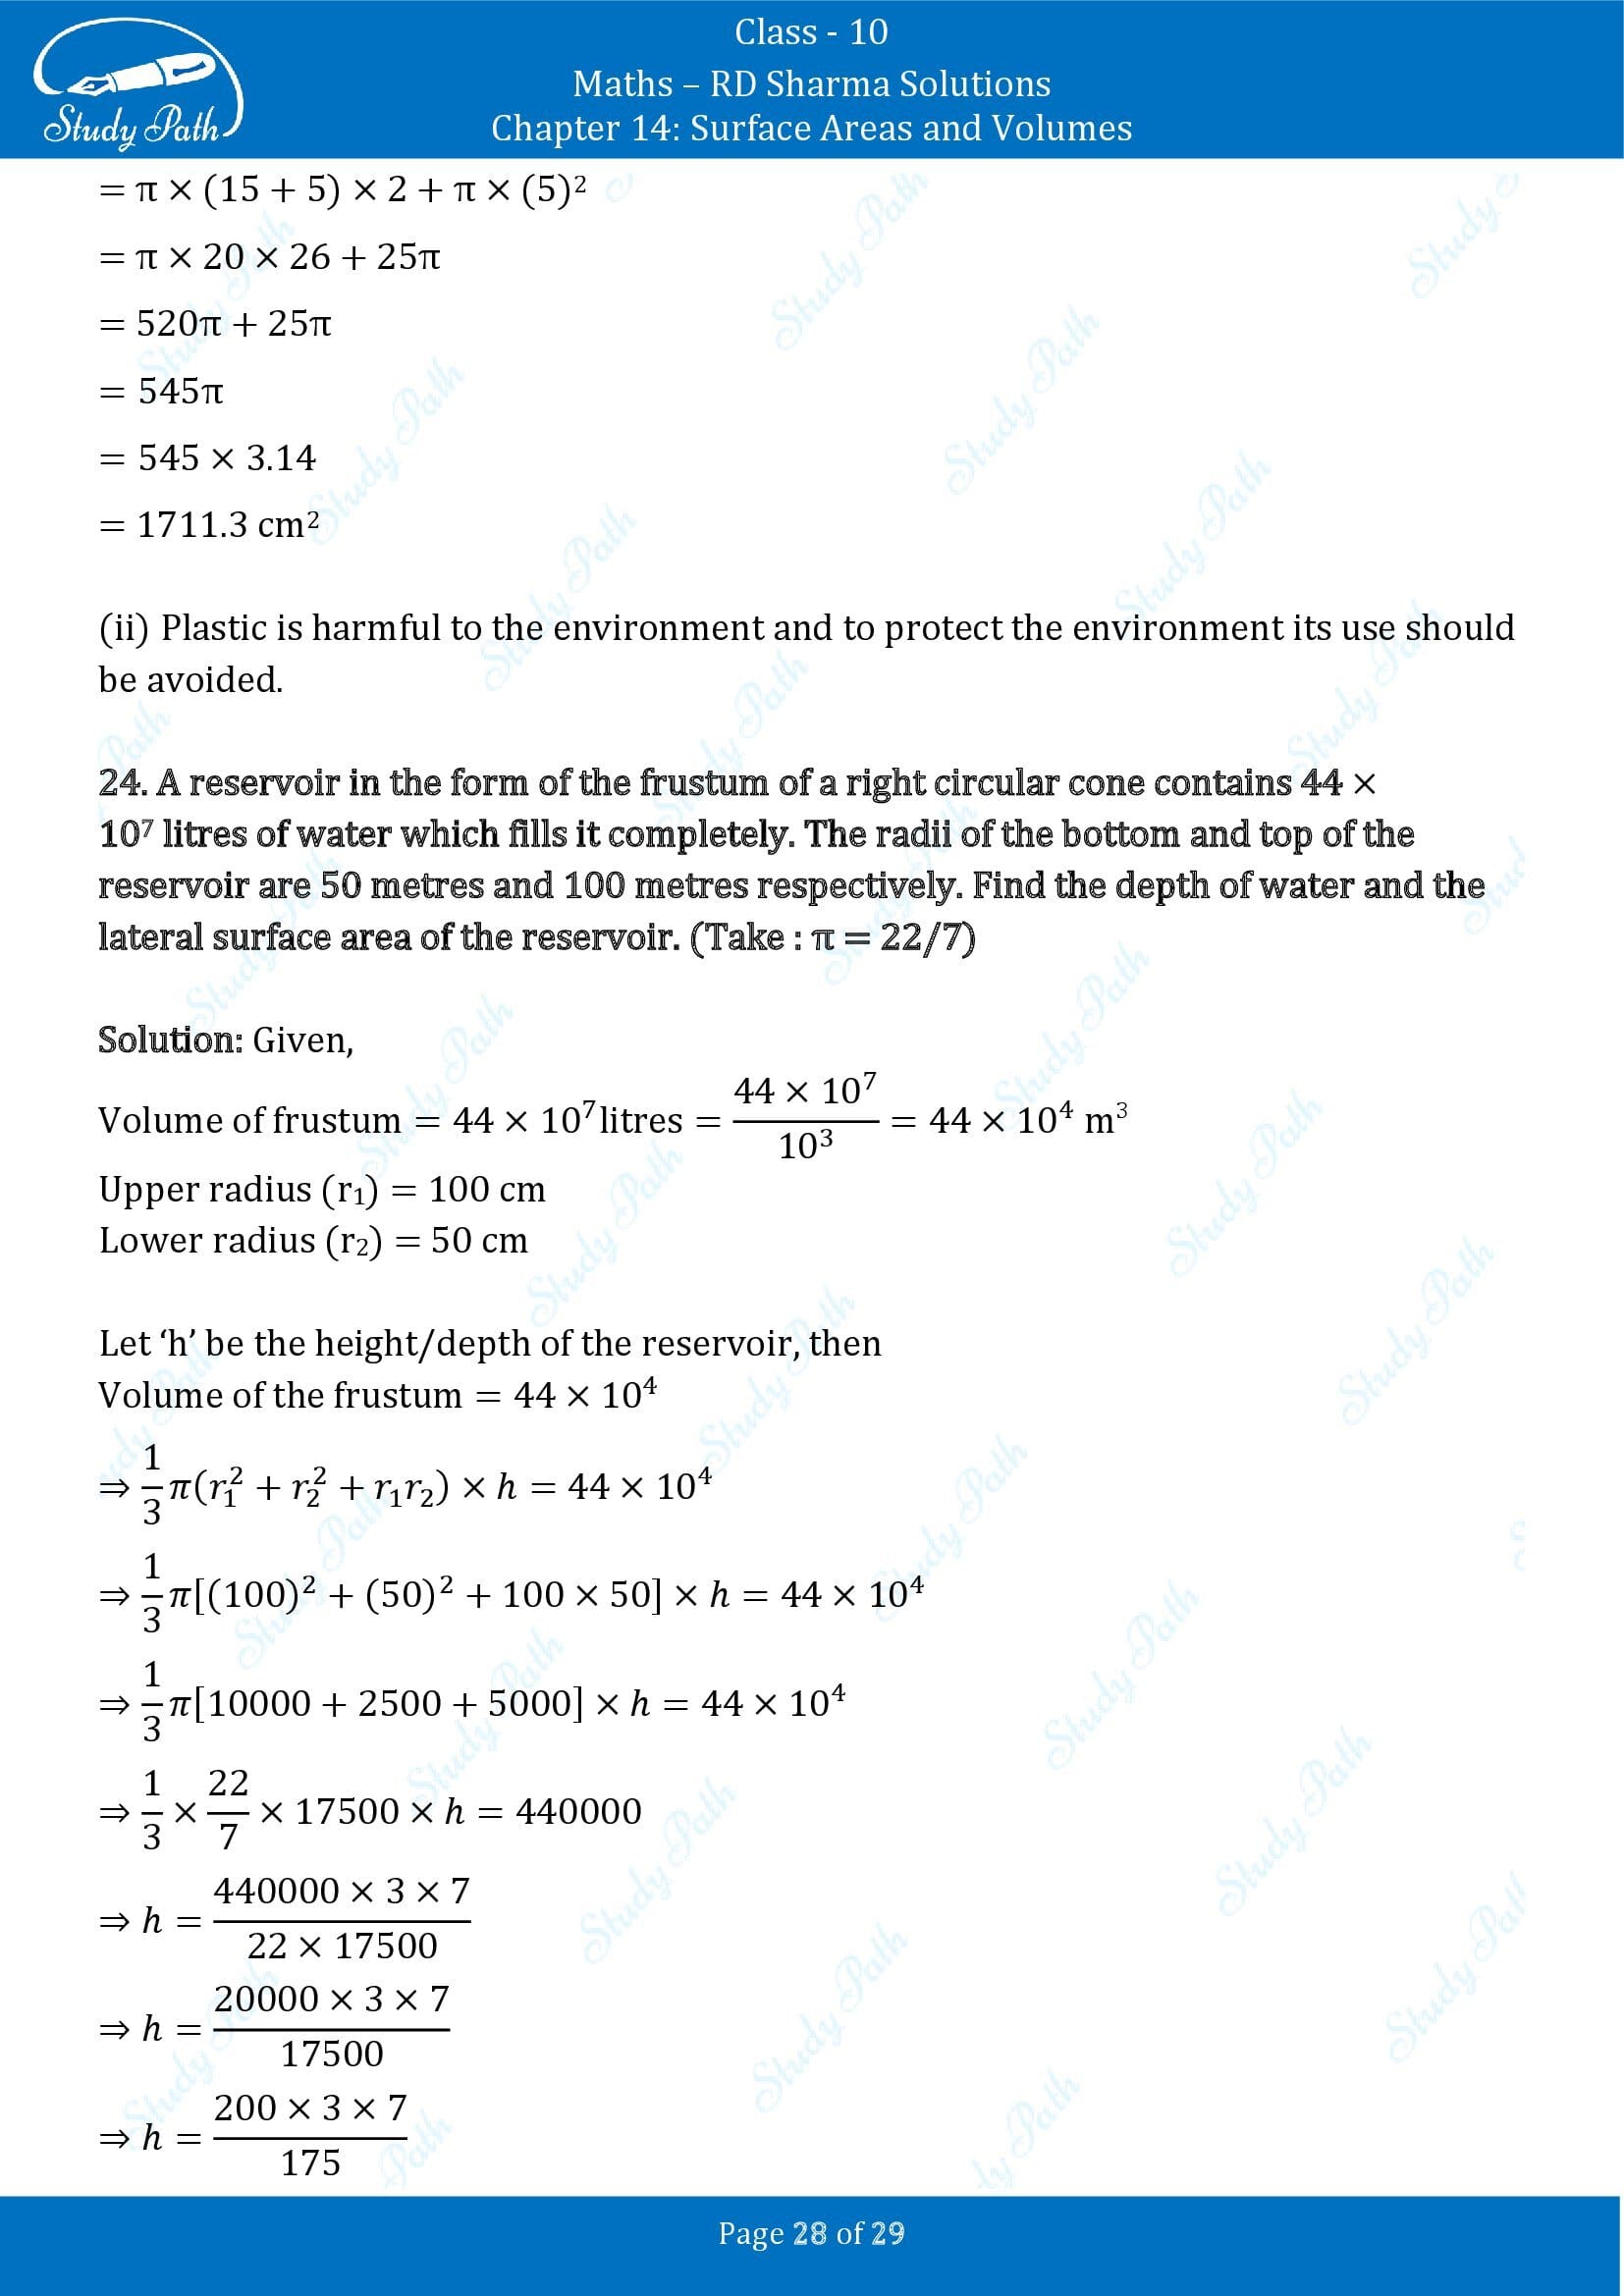 RD Sharma Solutions Class 10 Chapter 14 Surface Areas and Volumes Exercise 14.3 00028